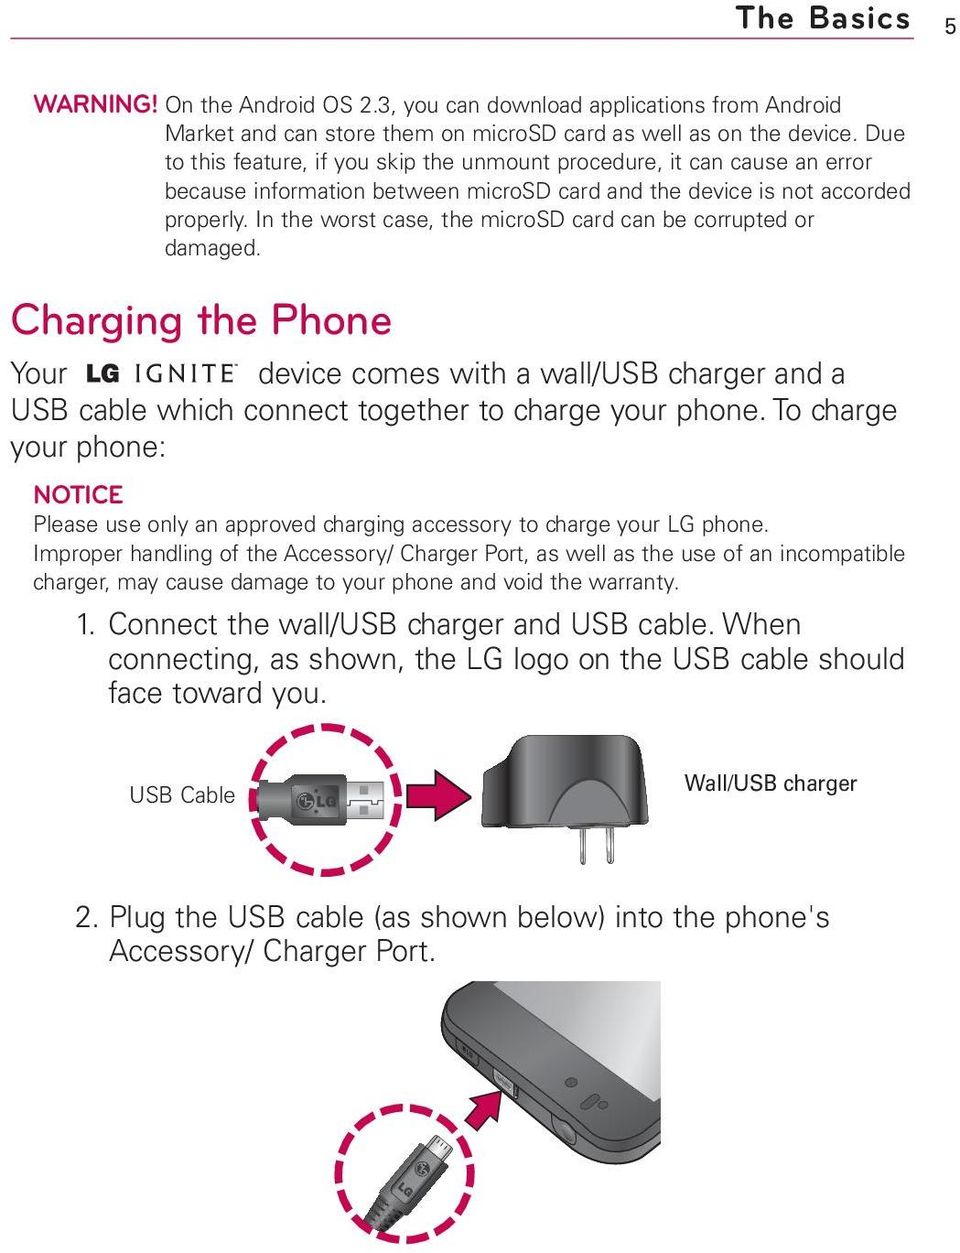 In the worst case, the microsd card can be corrupted or damaged. Charging the Phone Your device comes with a wall/usb charger and a USB cable which connect together to charge your phone.